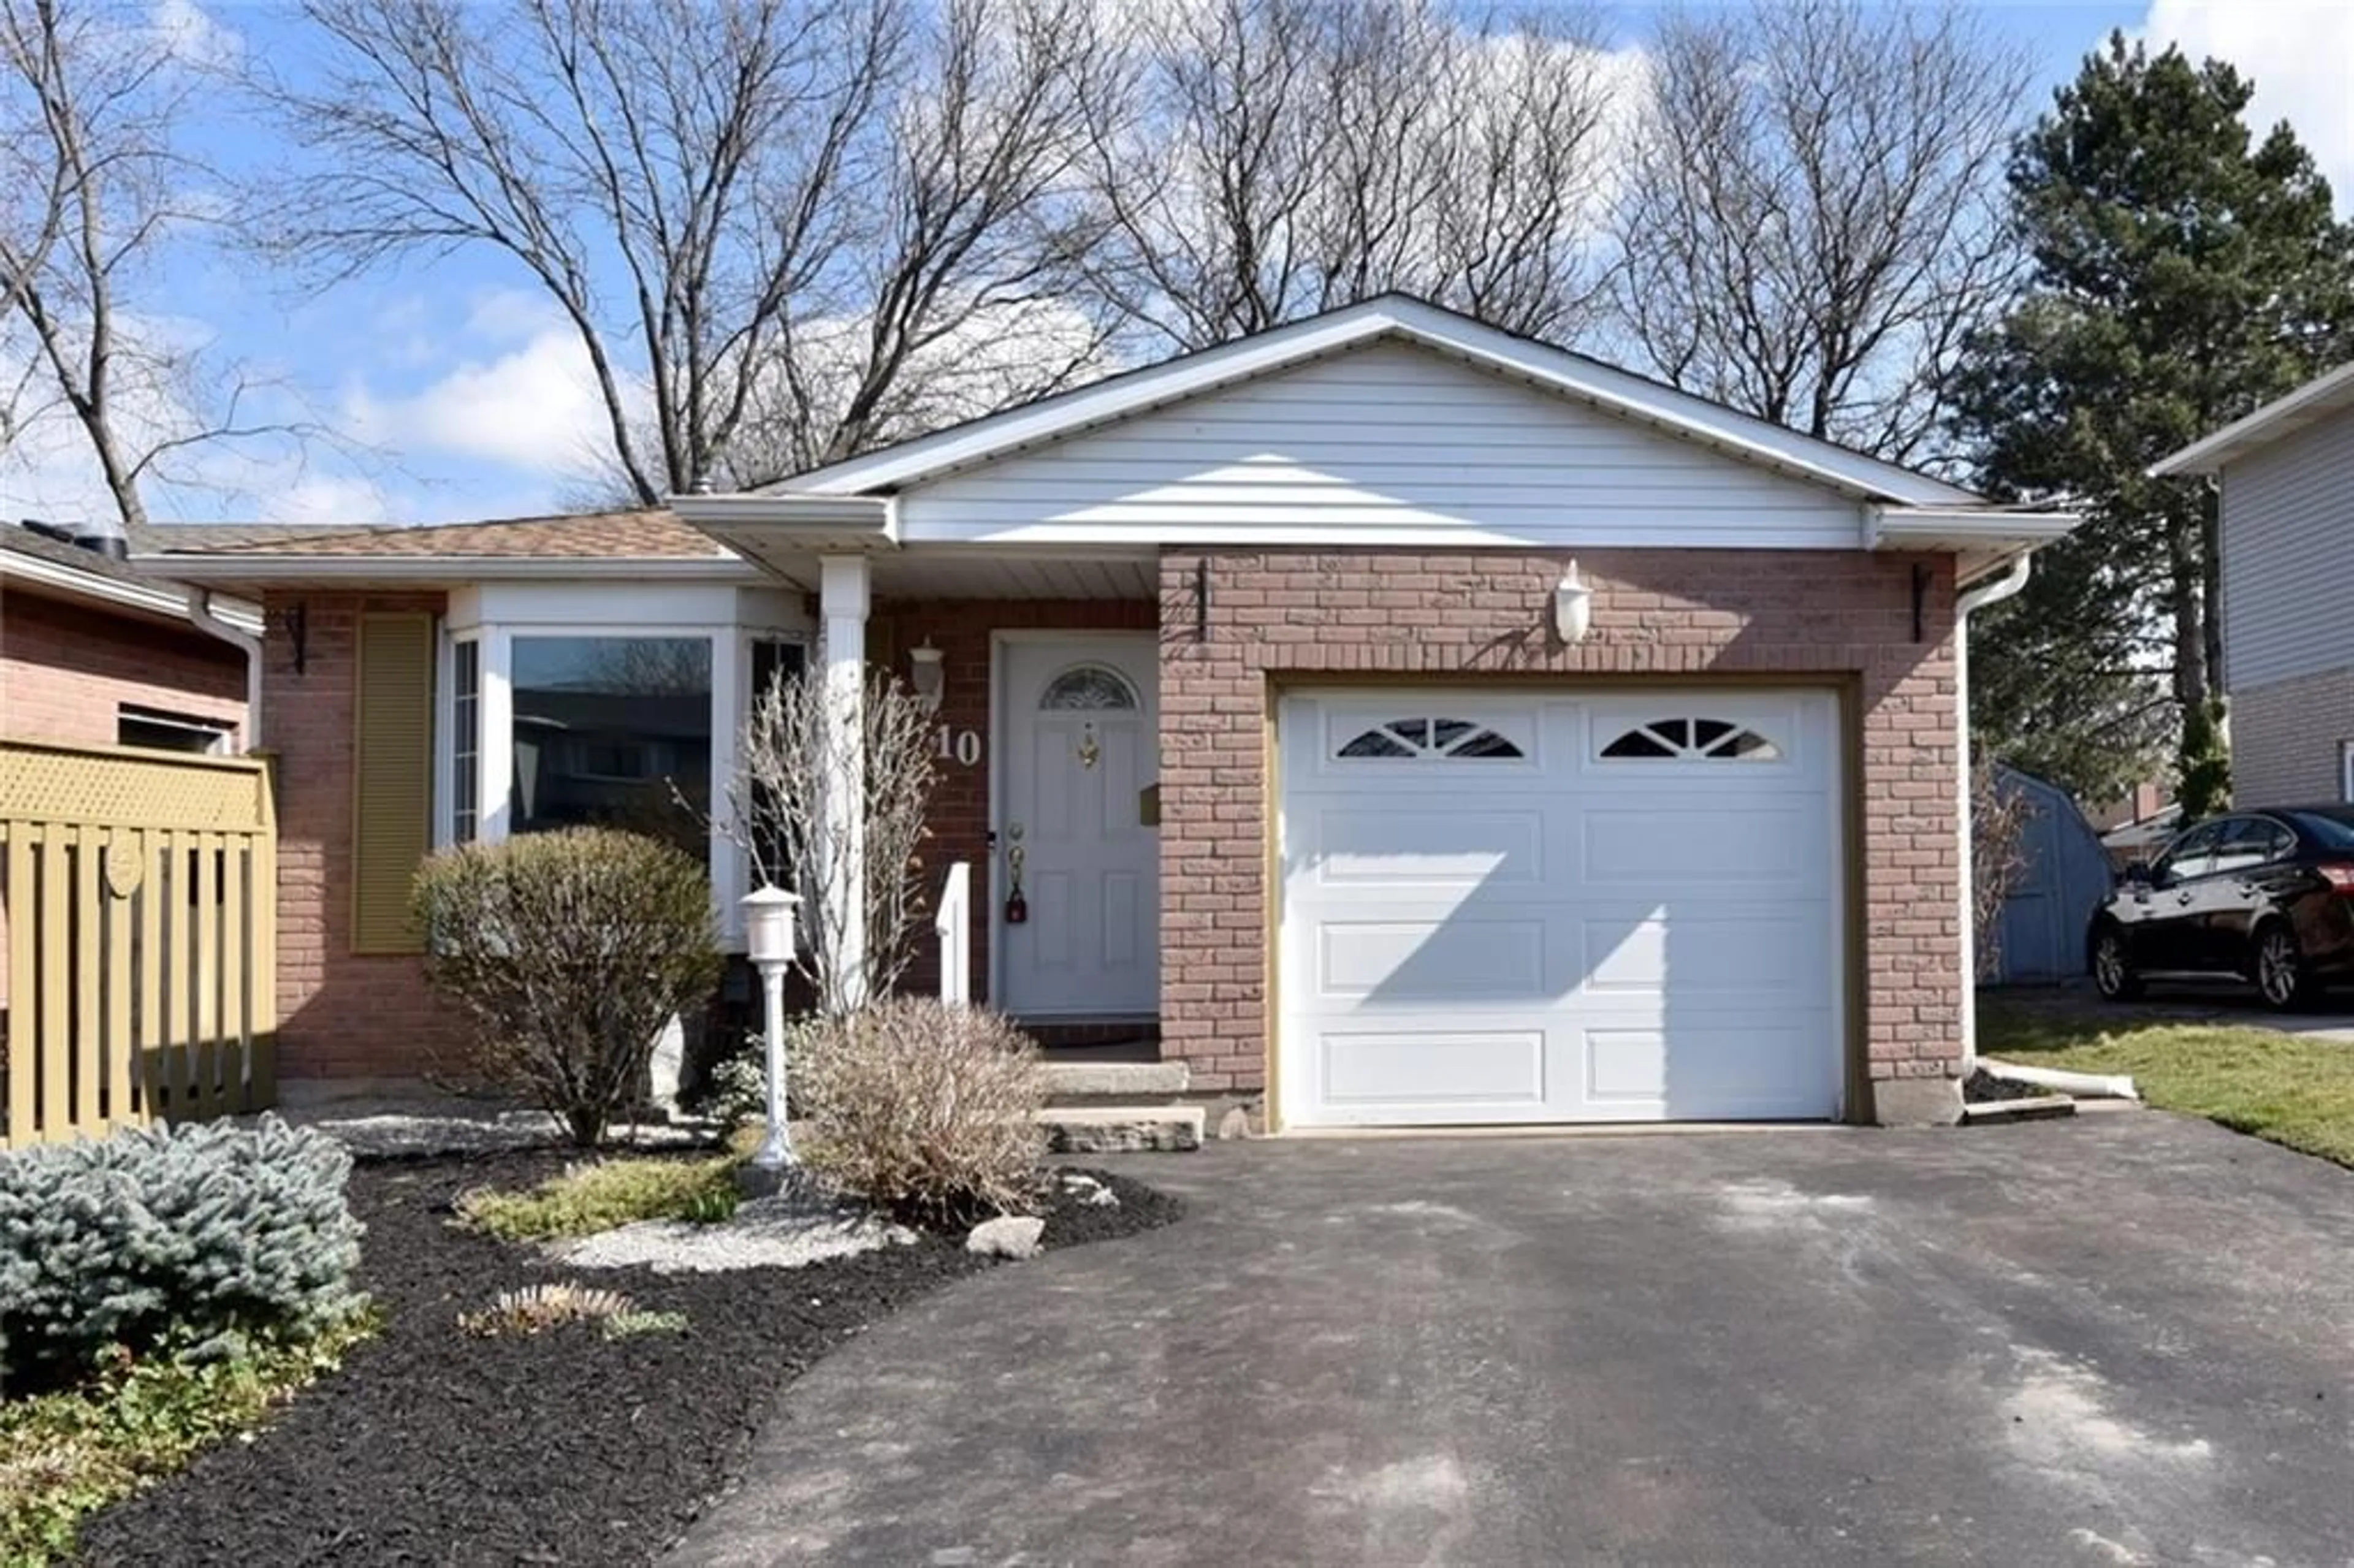 Home with brick exterior material for 10 SACKS Ave, Grimsby Ontario L3M 4Y4